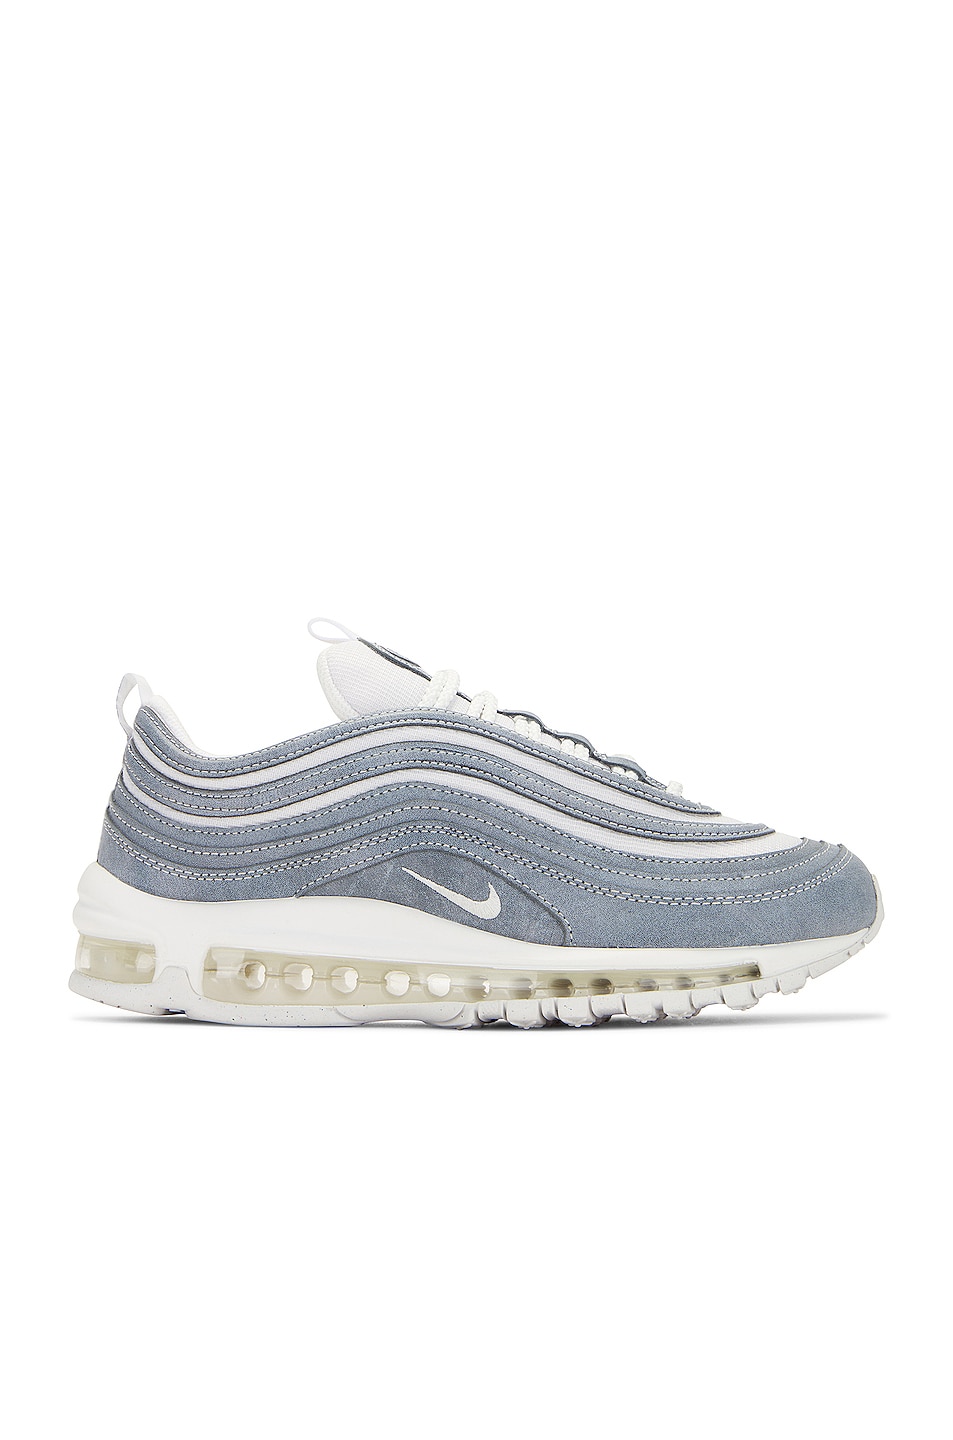 Image 1 of COMME des GARCONS Homme Plus NIKE Air Max 97 in Grey